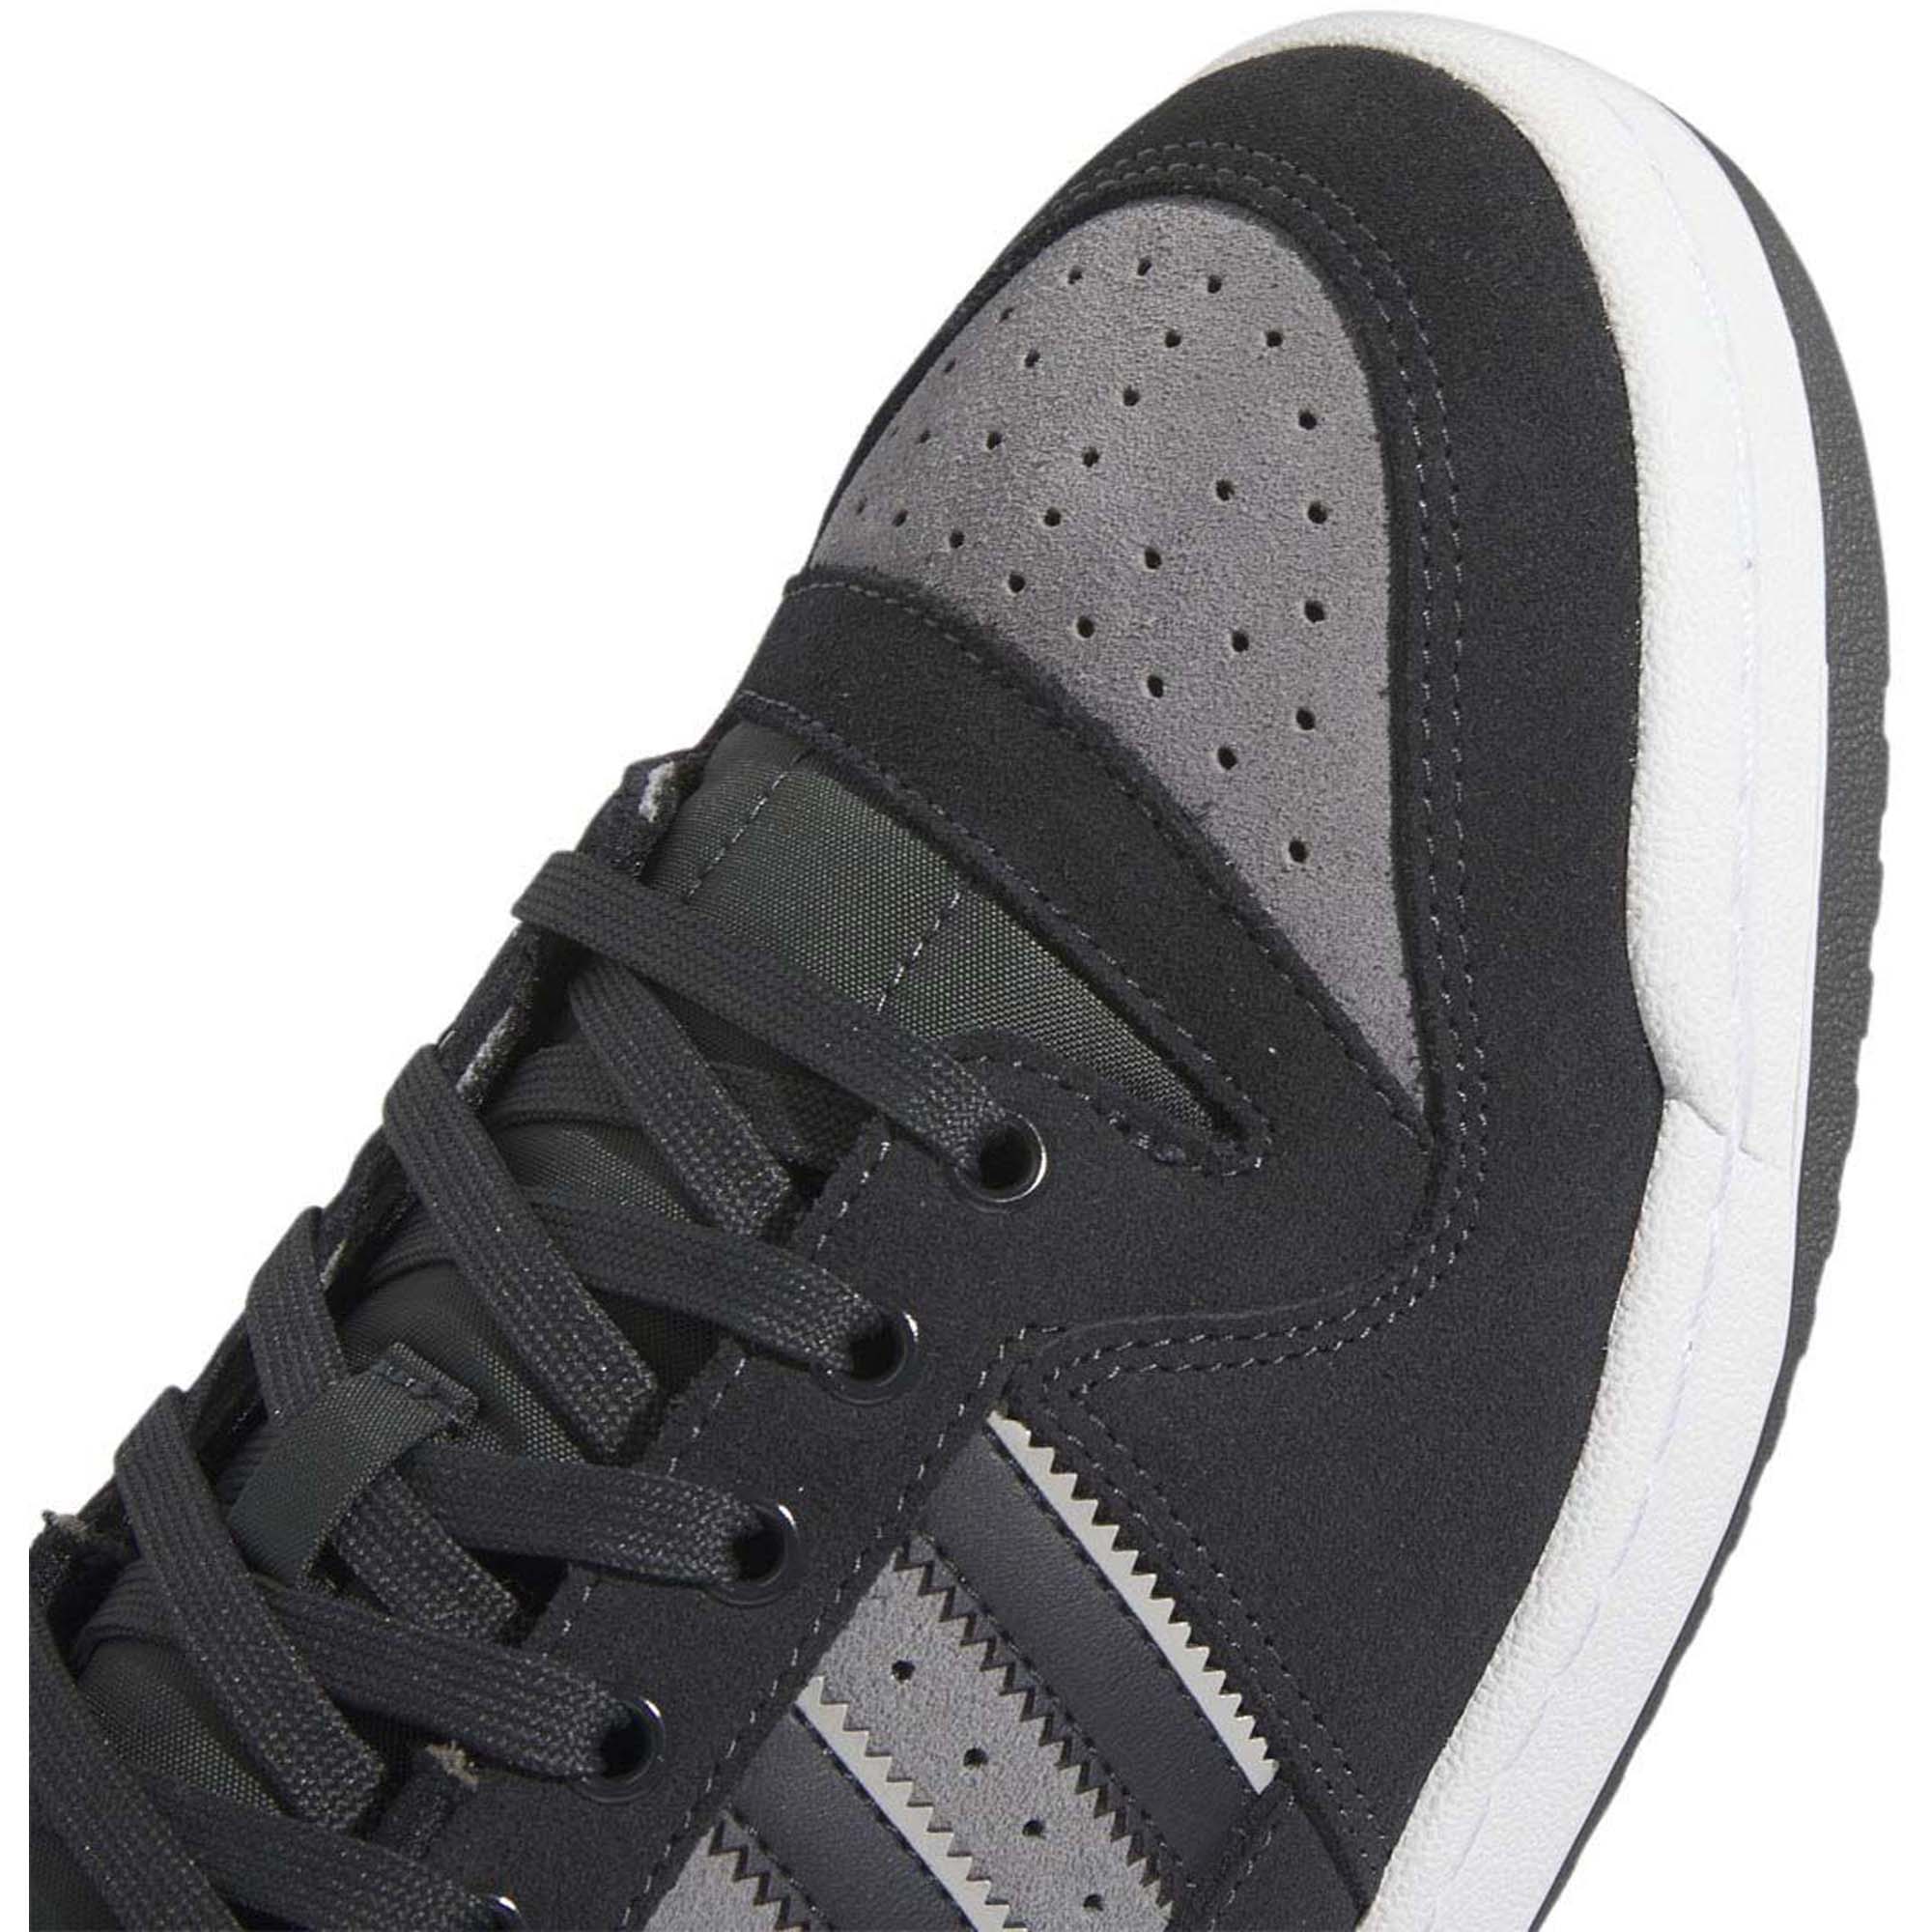 Adidas Forum 84 Low ADV Trainers/Skate Shoes